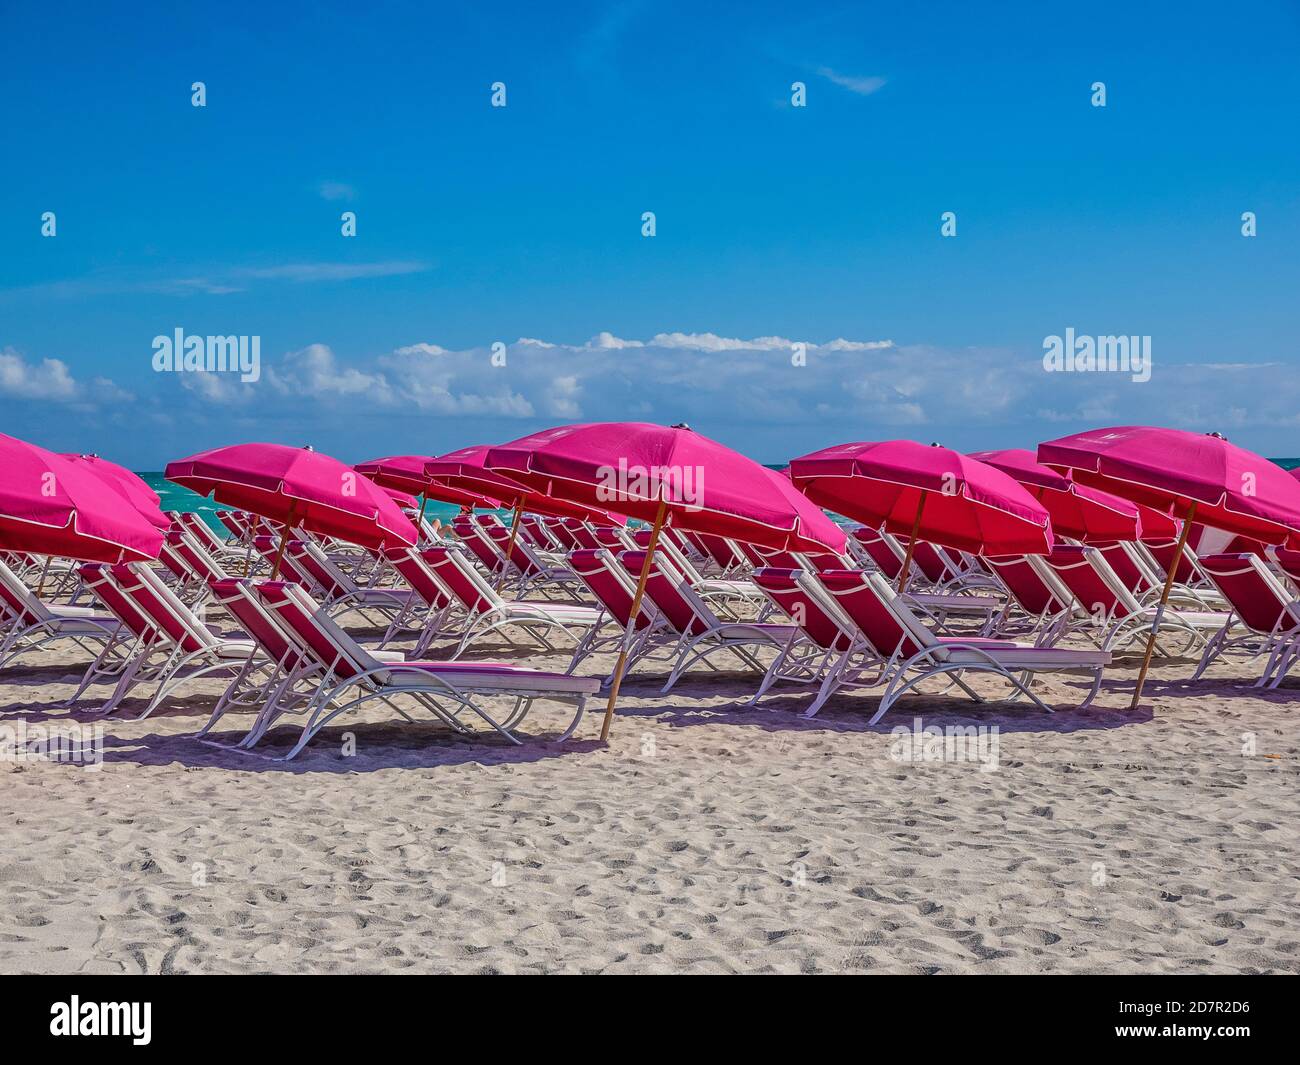 Multiple magenta beach umbrellas and chaise lounges await customers on Miami Beach. Stock Photo